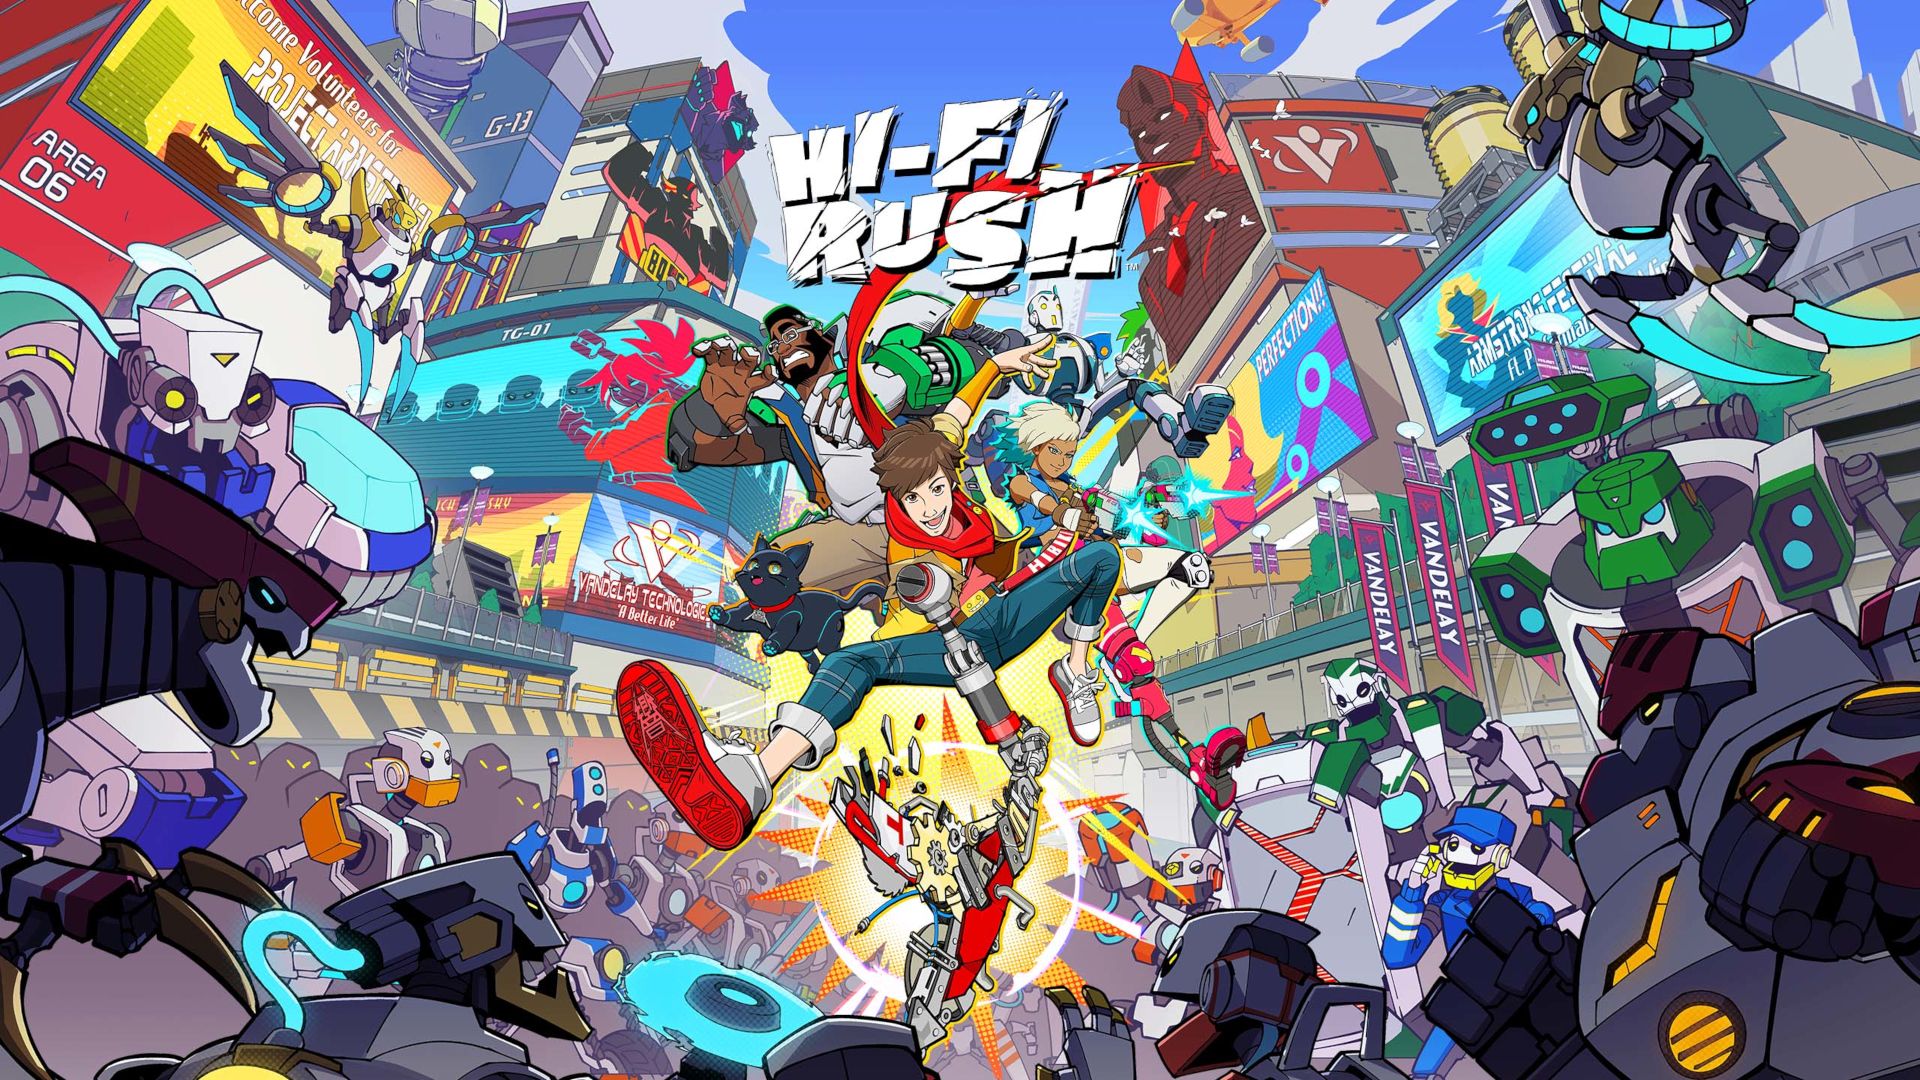 Cover art for Hi-Fi Rush. A stylized range of characters run through city streets crowded with robots.